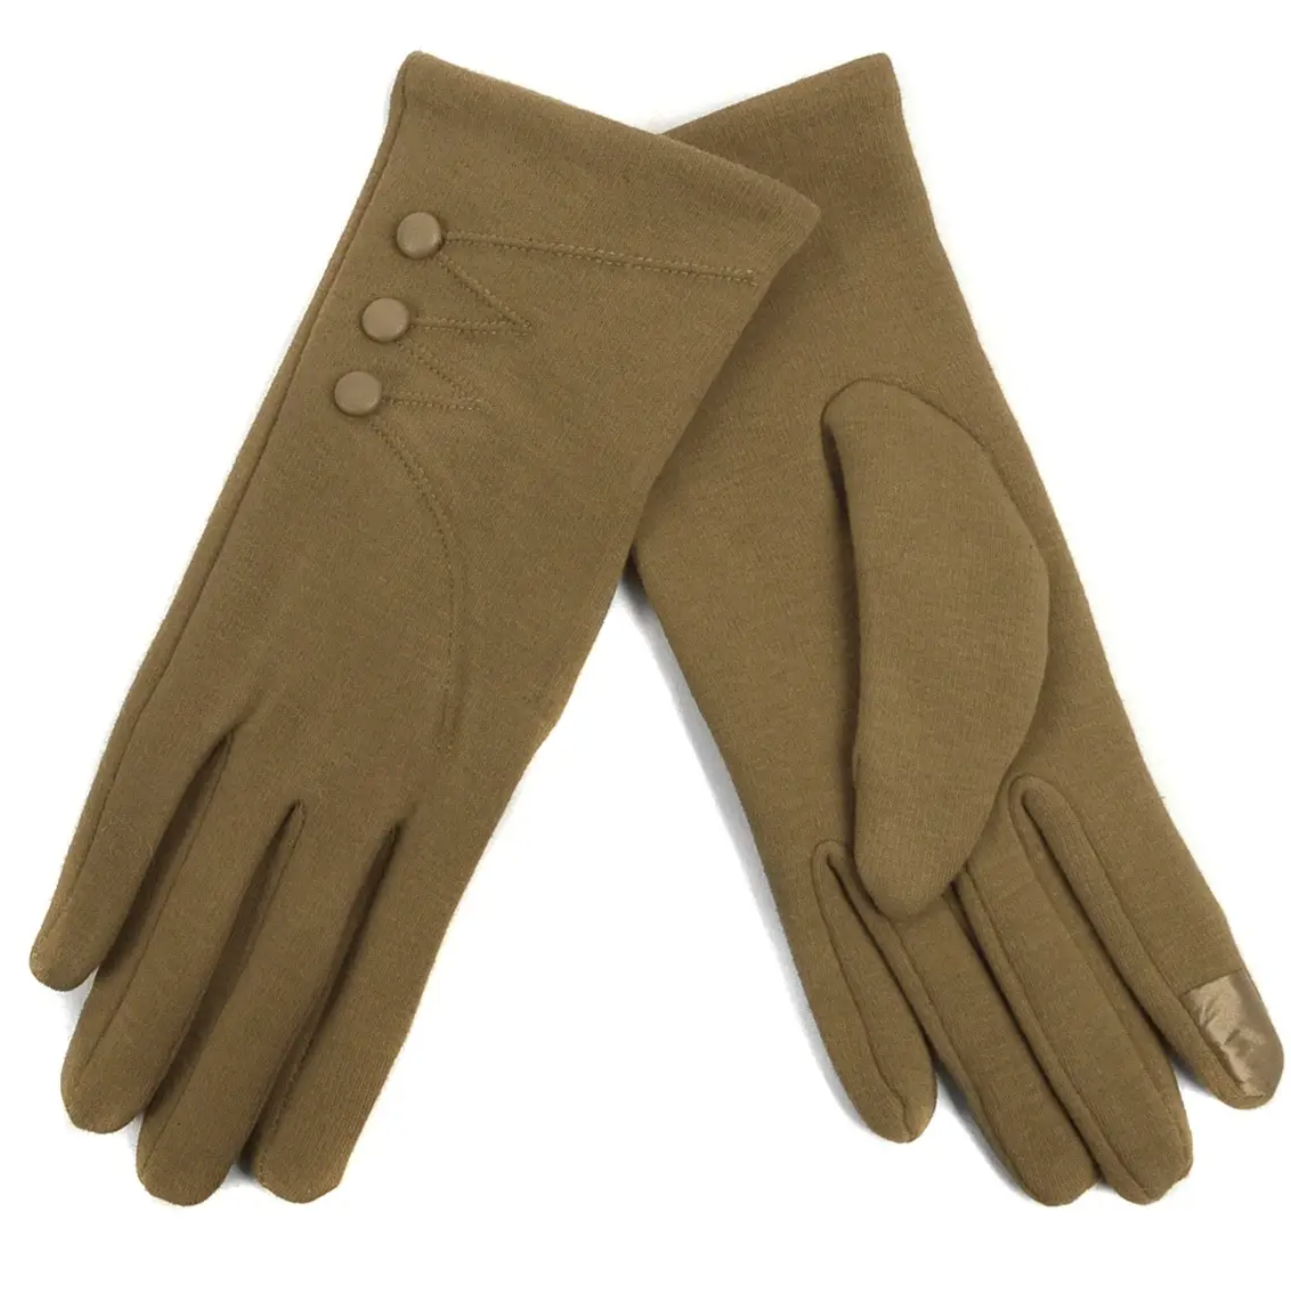 WOMEN'S STYLISH 3-BUTTON TOUCH SCREEN GLOVES